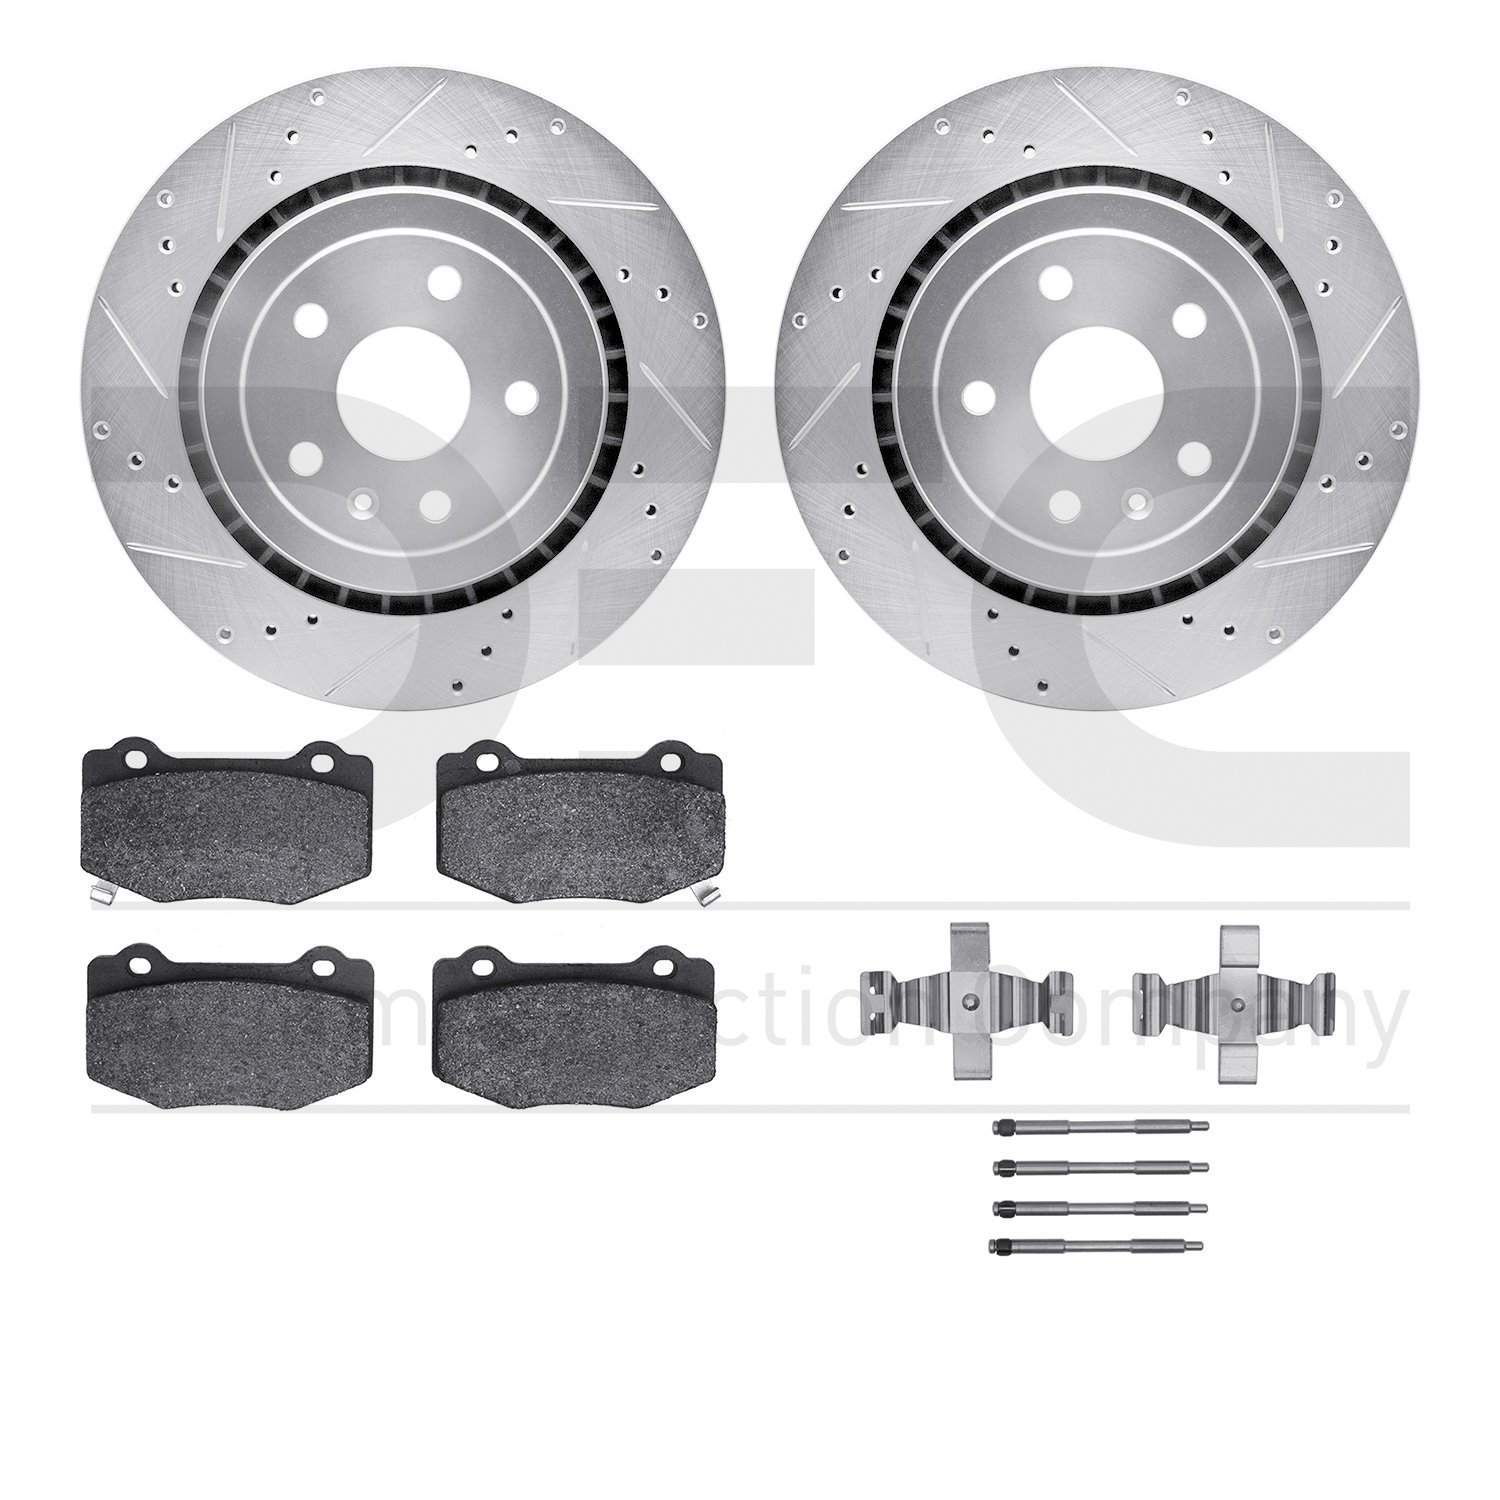 7612-47012 Drilled/Slotted Brake Rotors w/5000 Euro Ceramic Brake Pads Kit & Hardware [Silver], Fits Select GM, Position: Rear